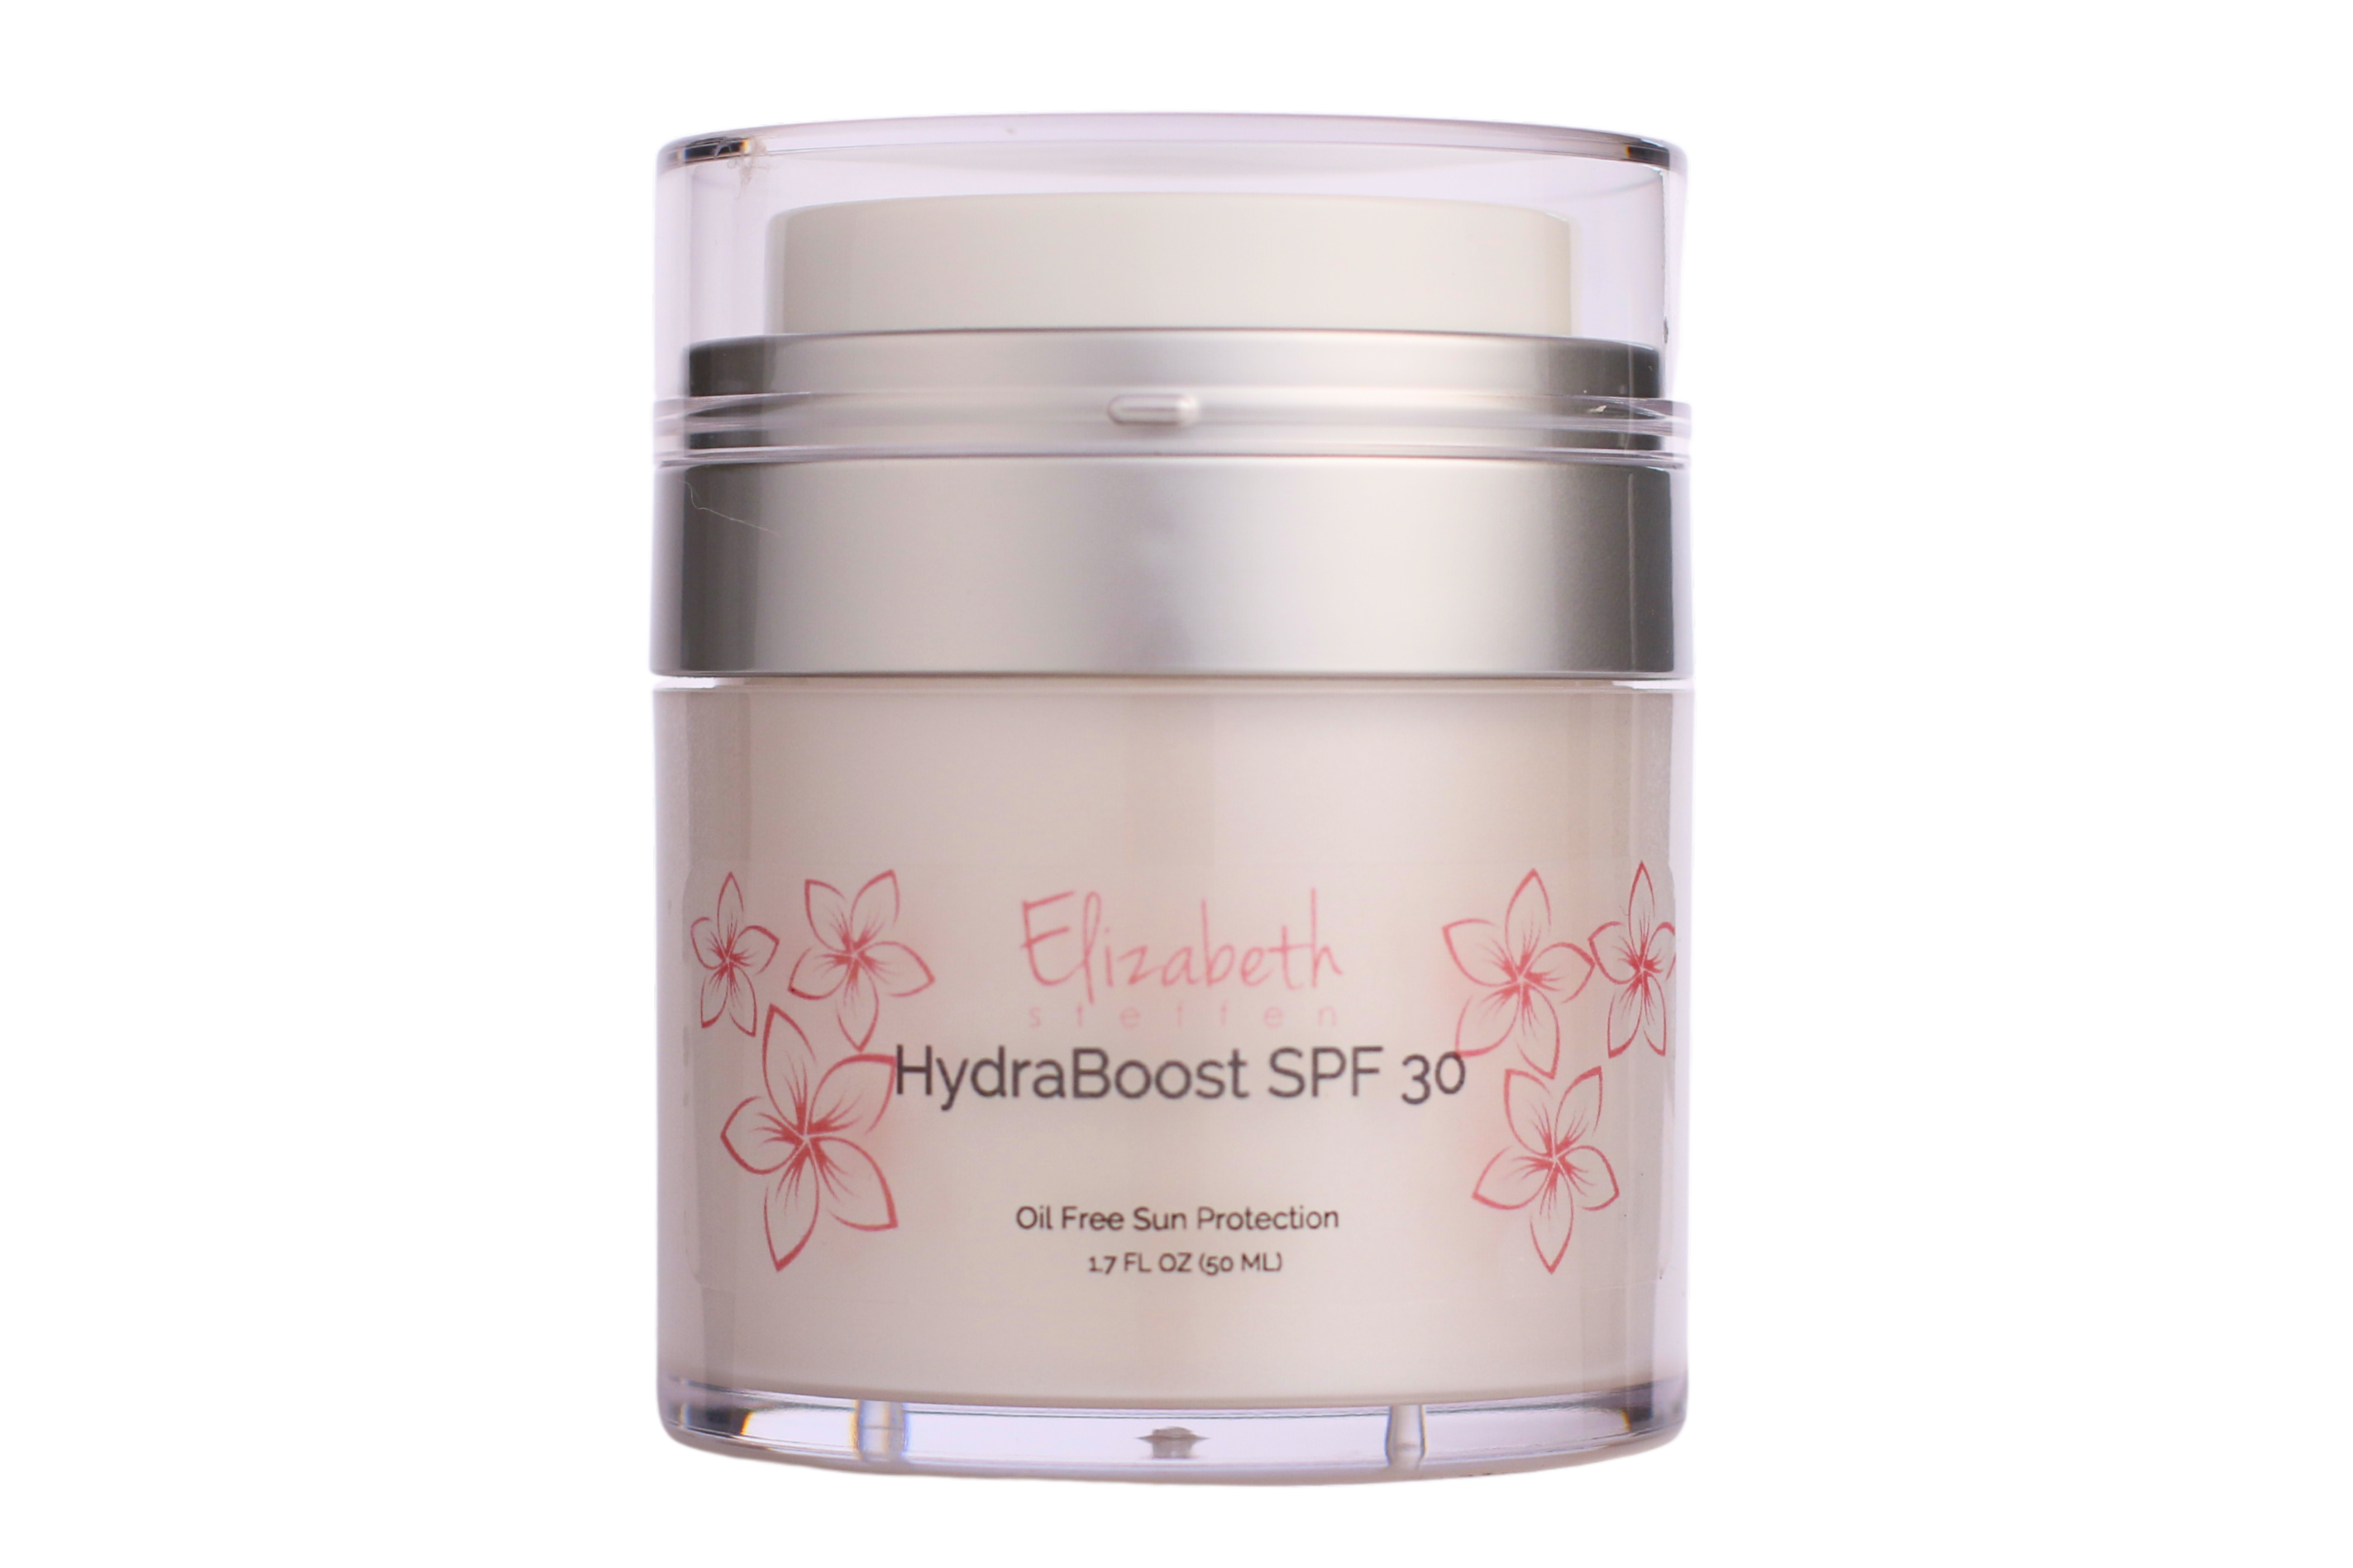 Hydraboost SPF 30 Oil-Free Sun Protection